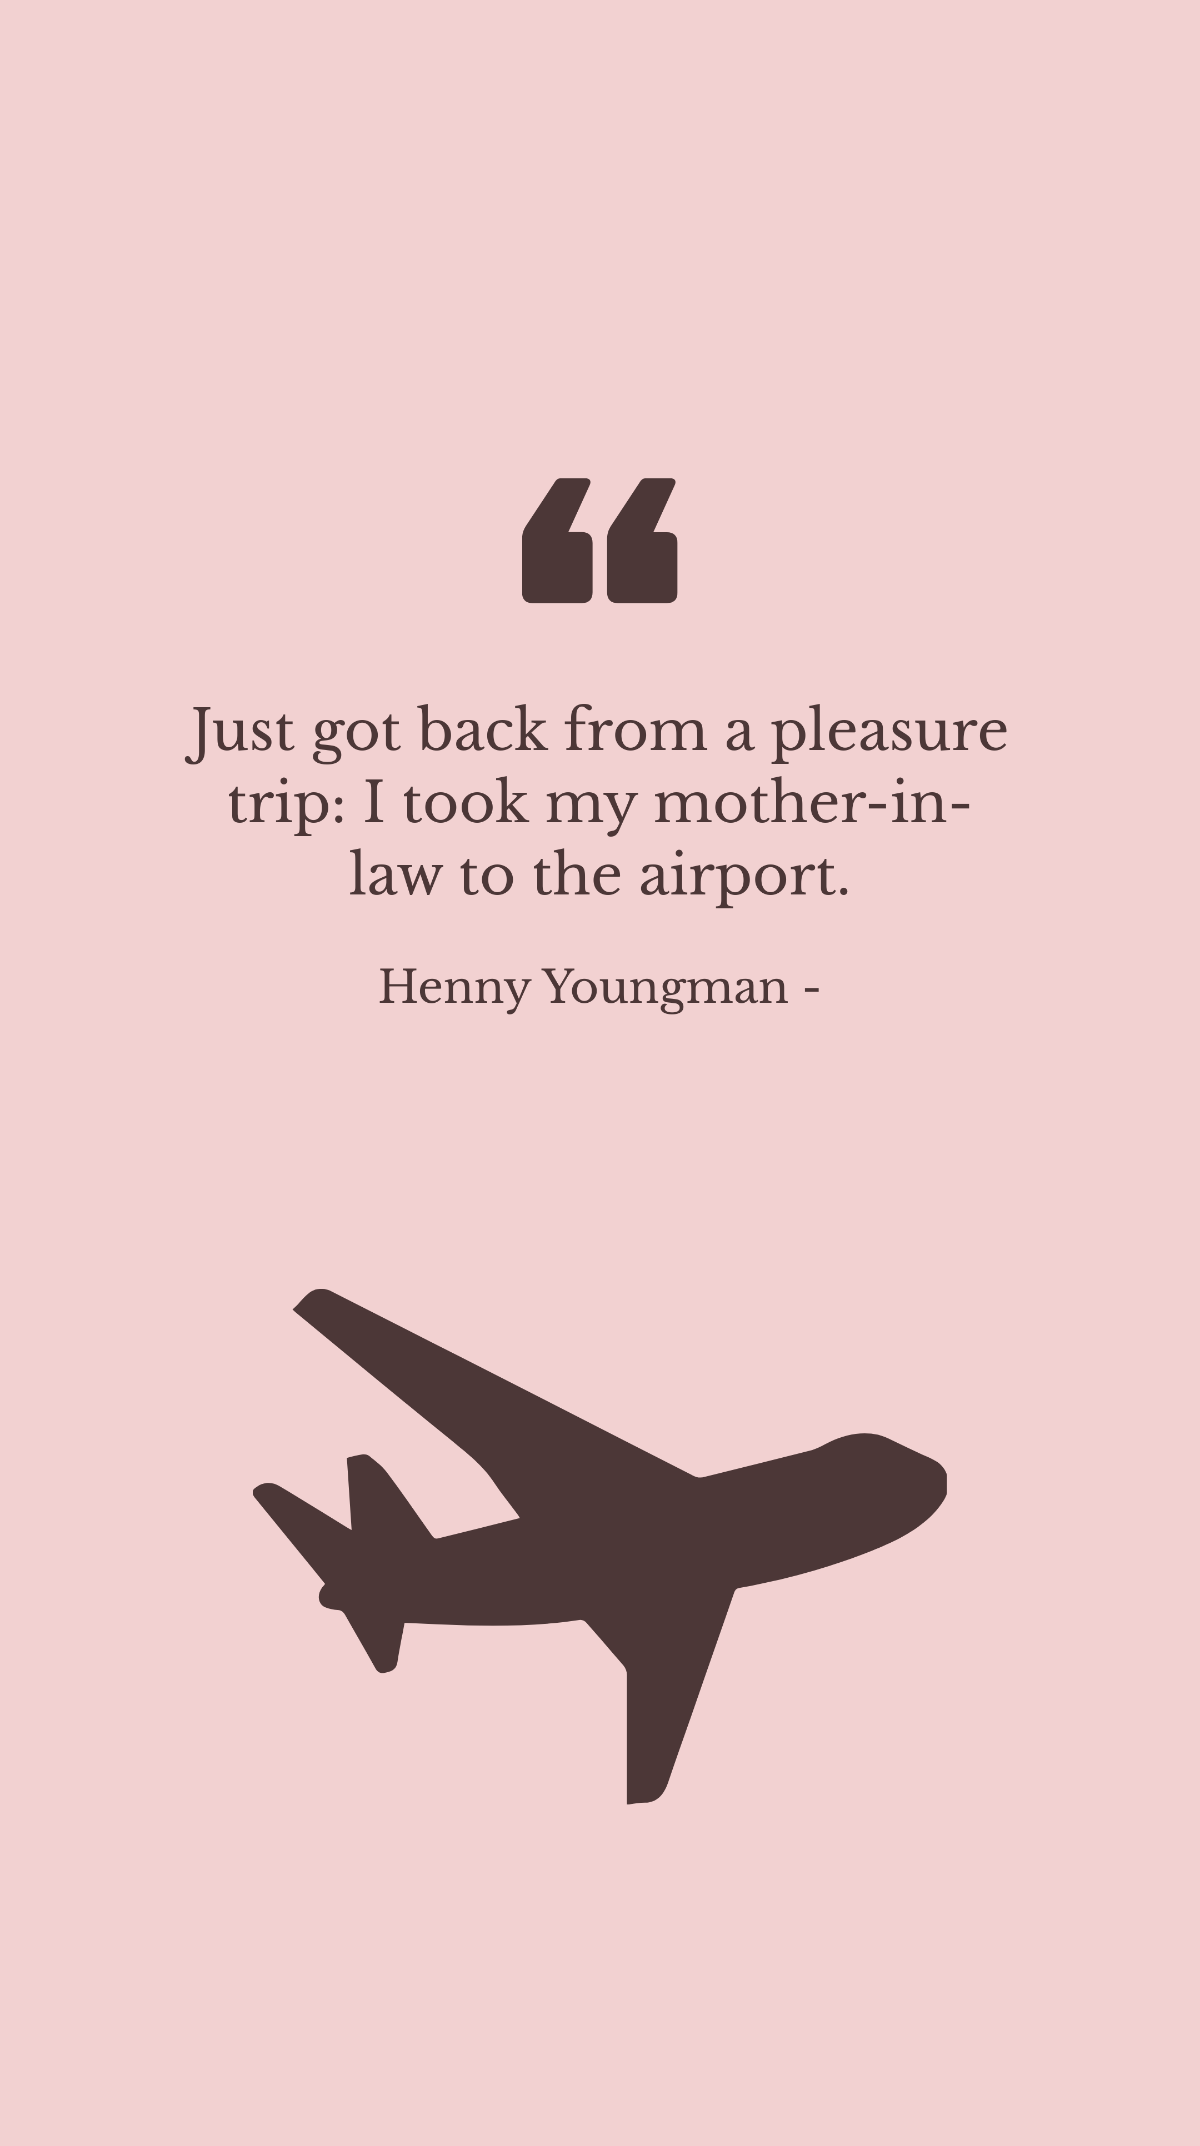 Henny Youngman - Just got back from a pleasure trip: I took my mother-in-law to the airport. Template